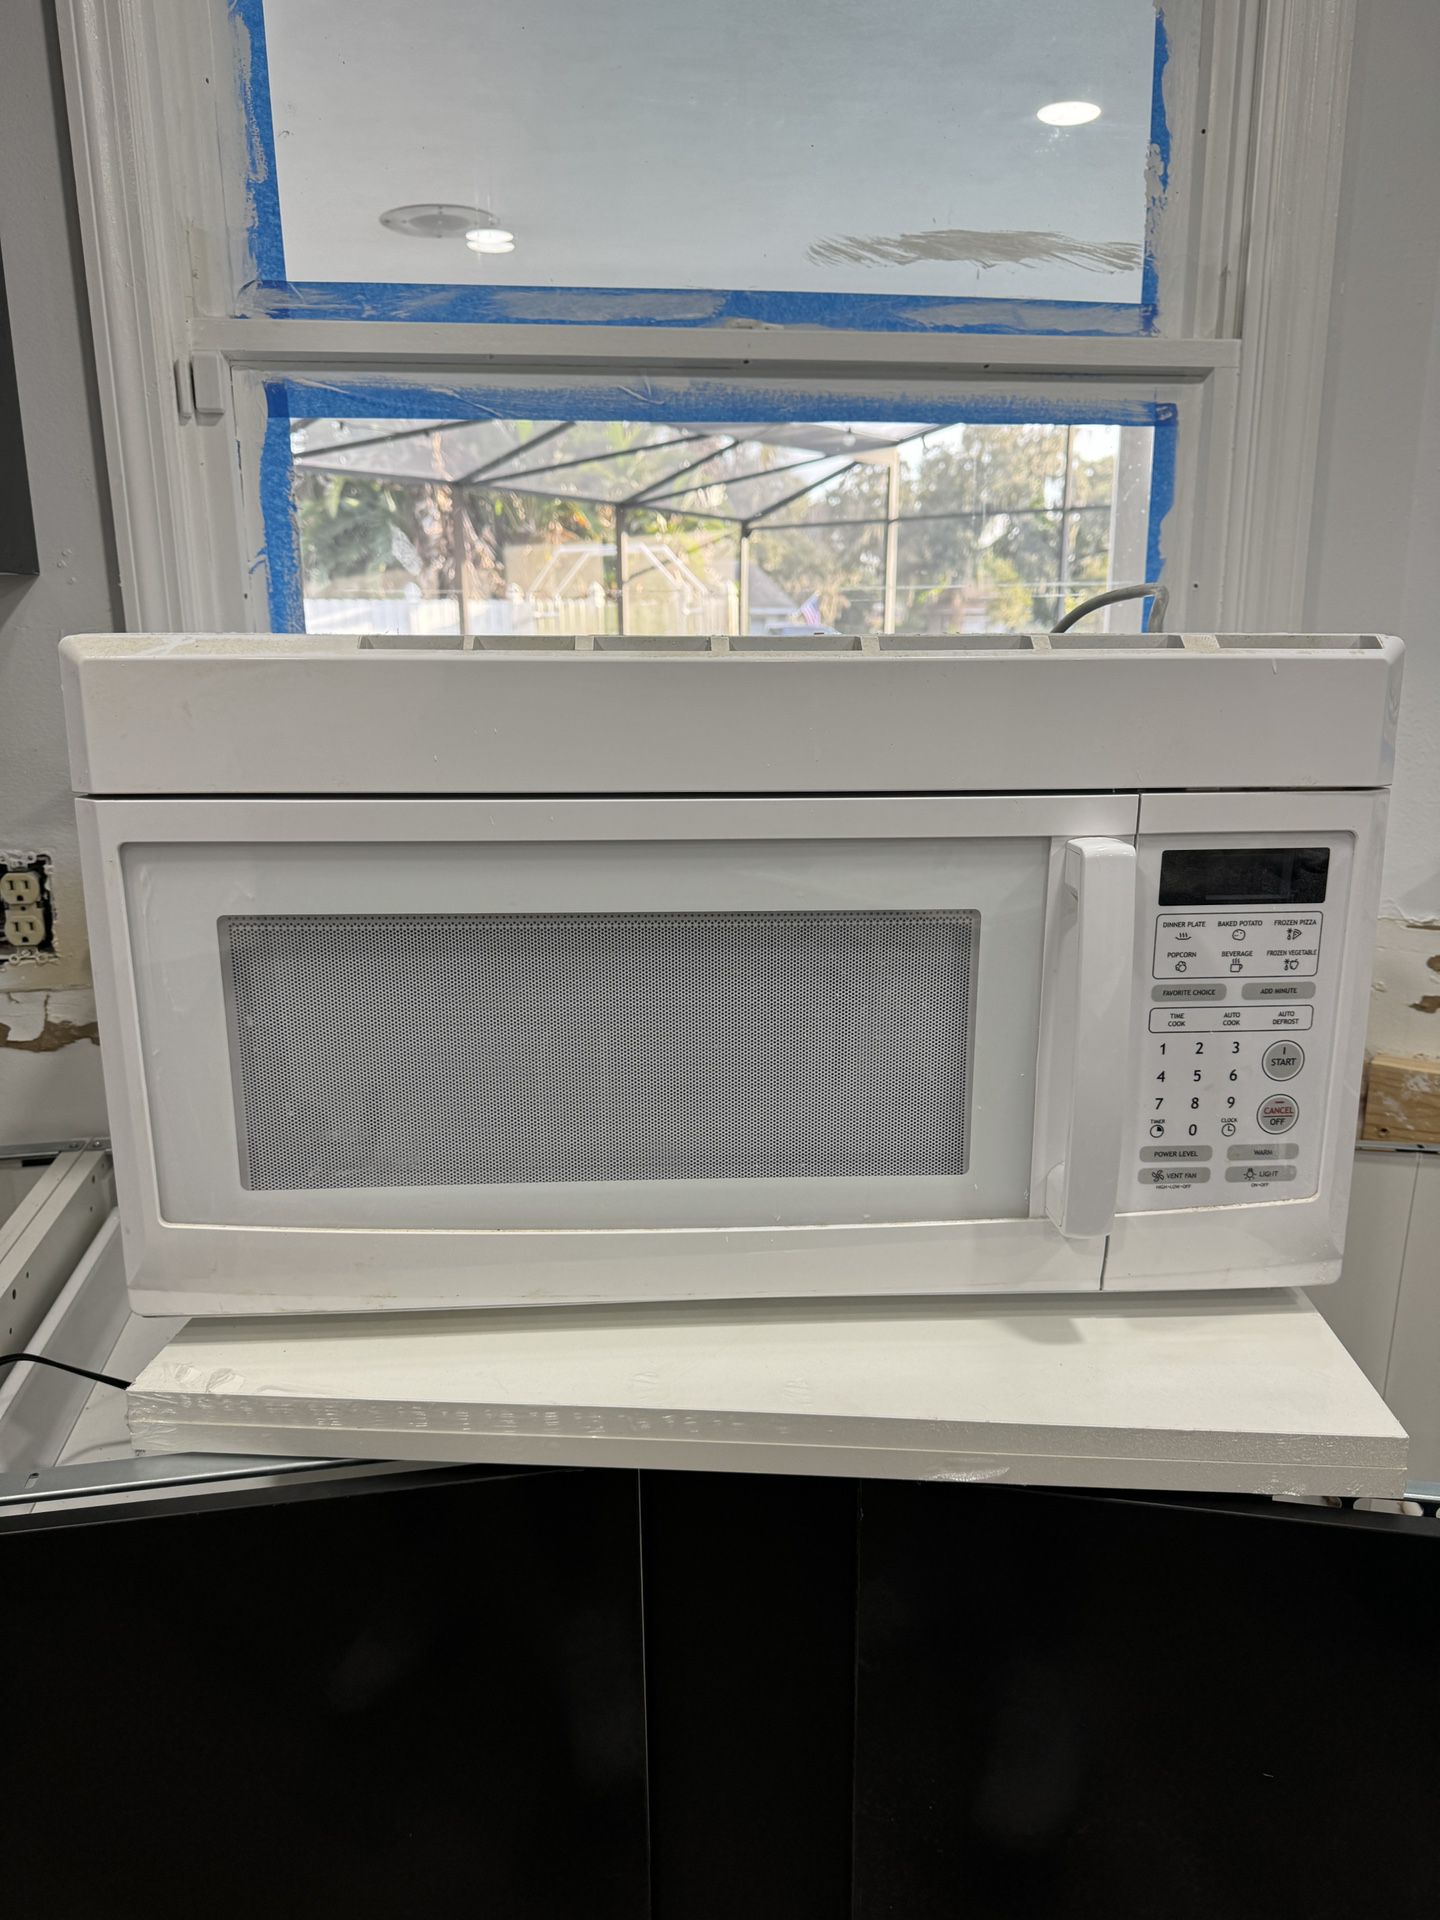 GE Microwave Great Condition